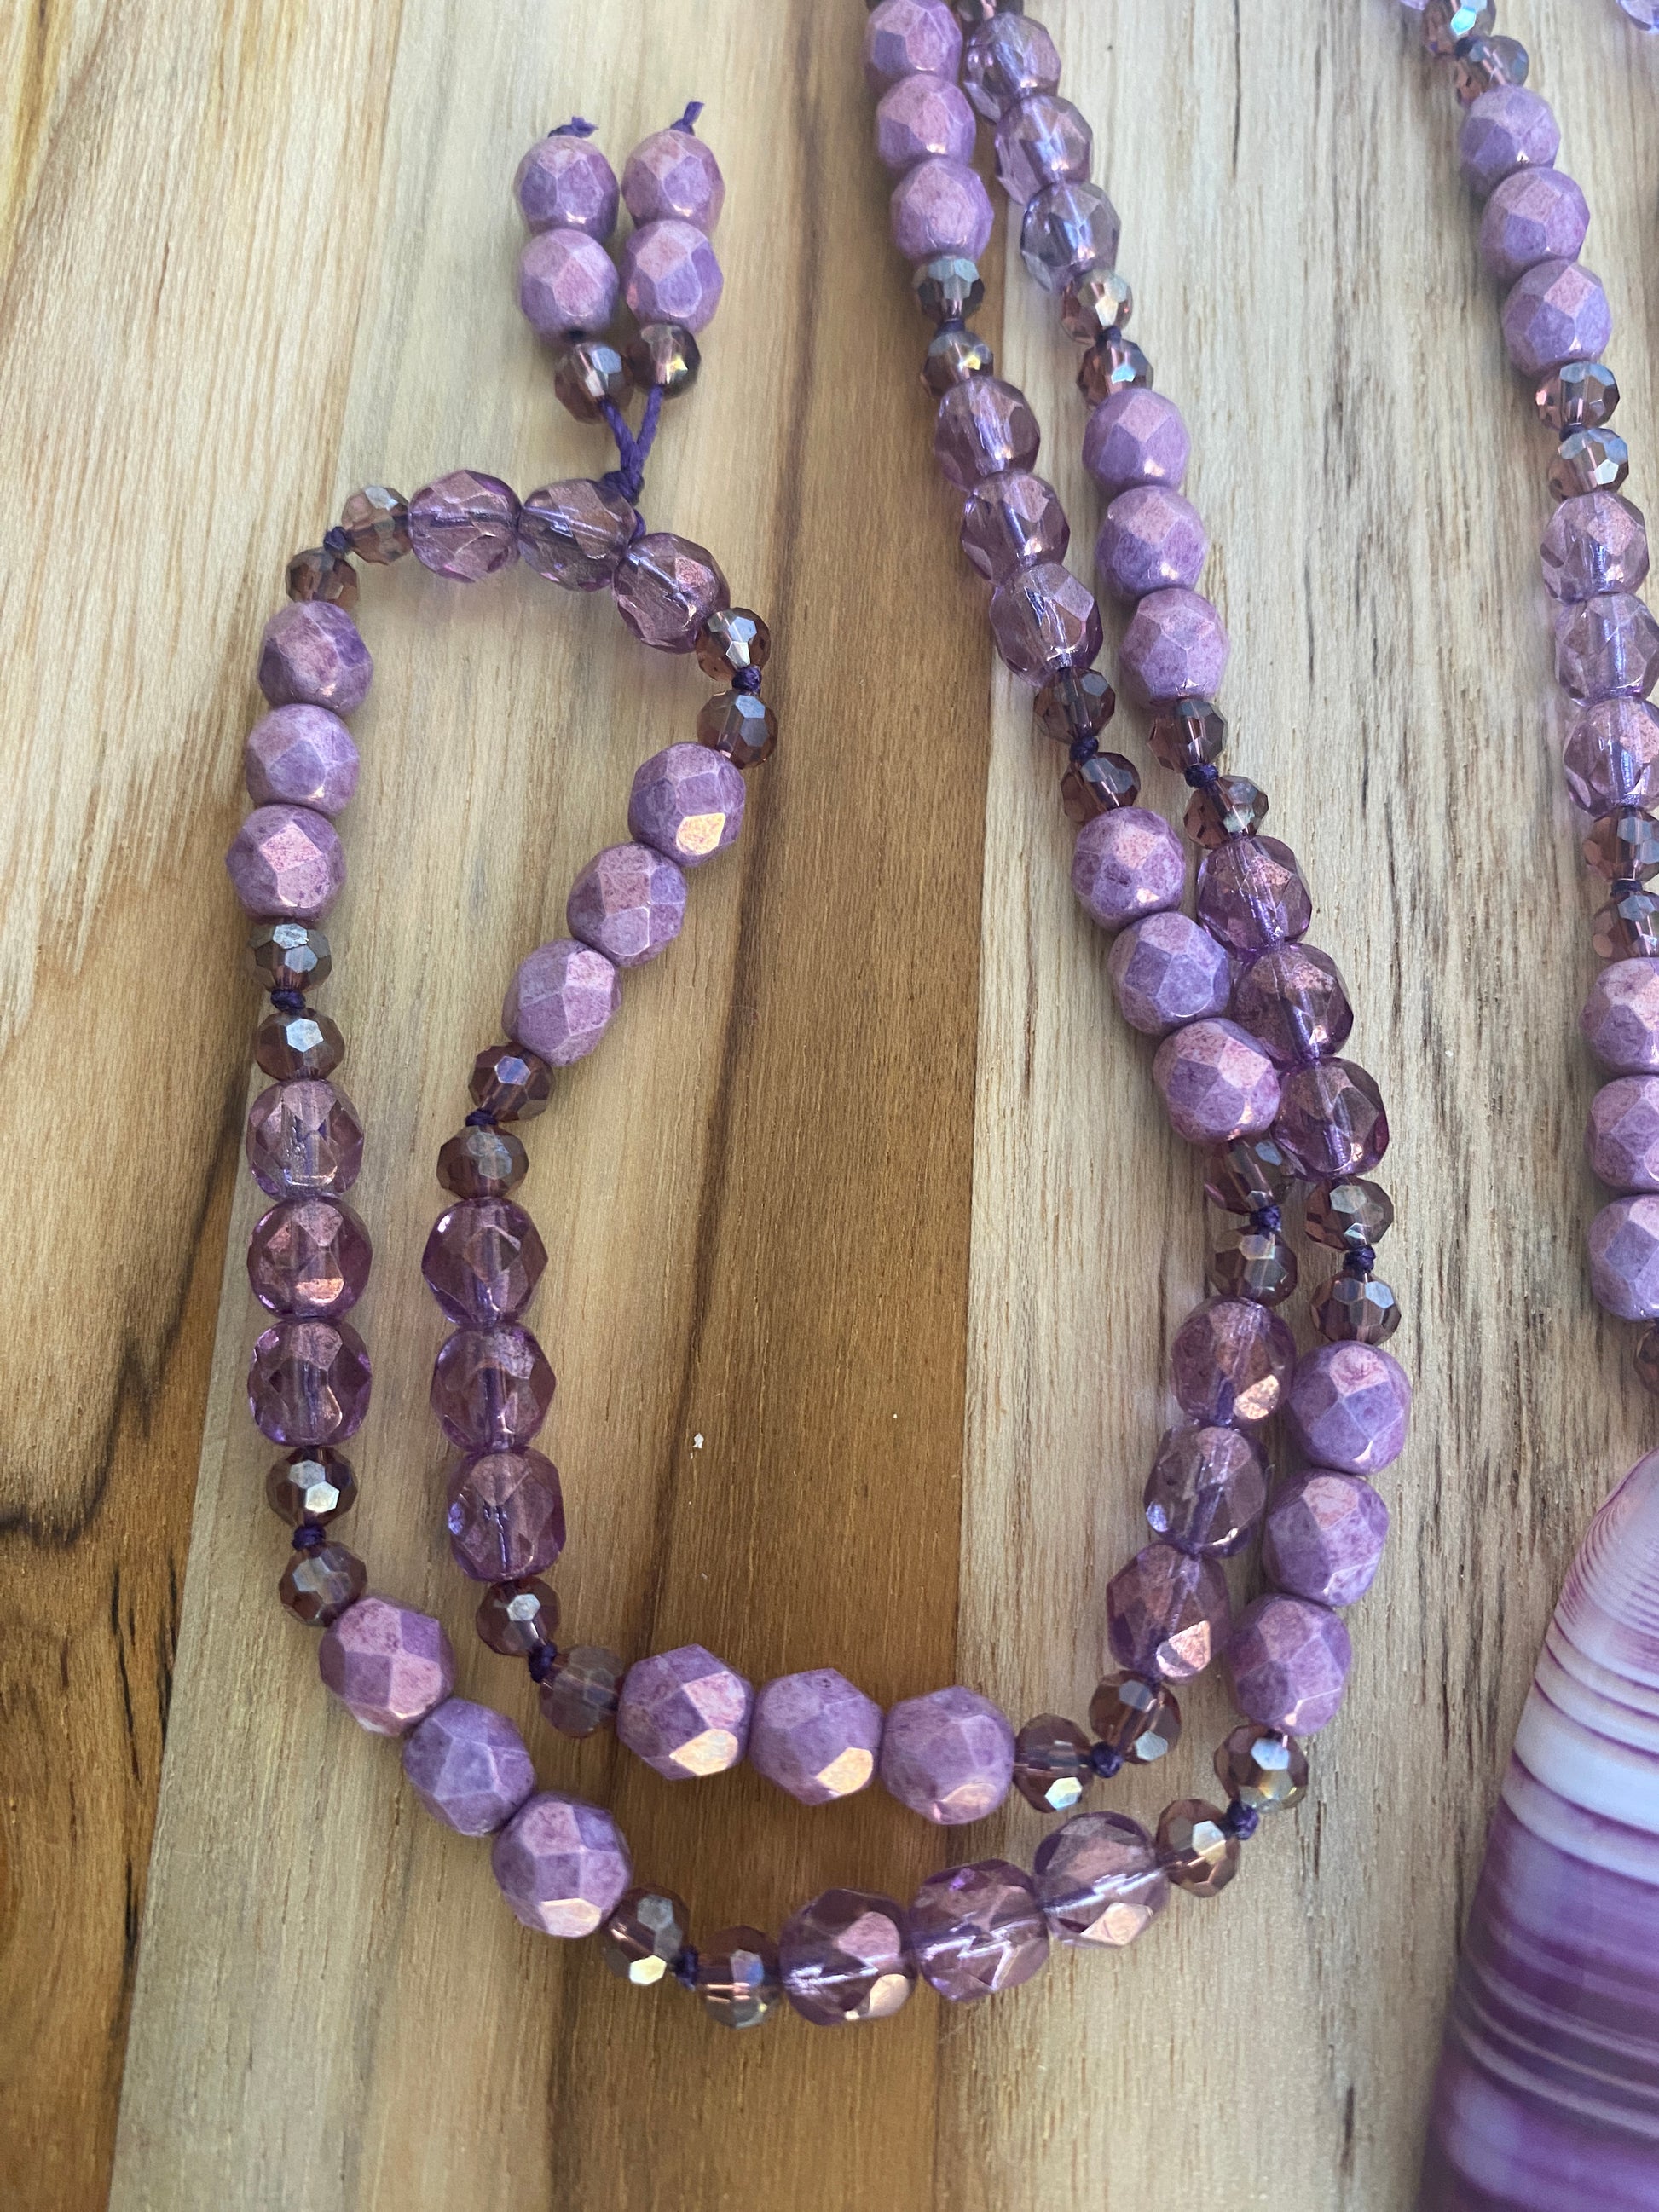 28" Long Purple Stripes Agate Beaded Necklace with Czech Glass & Crystal Beads - My Urban Gems